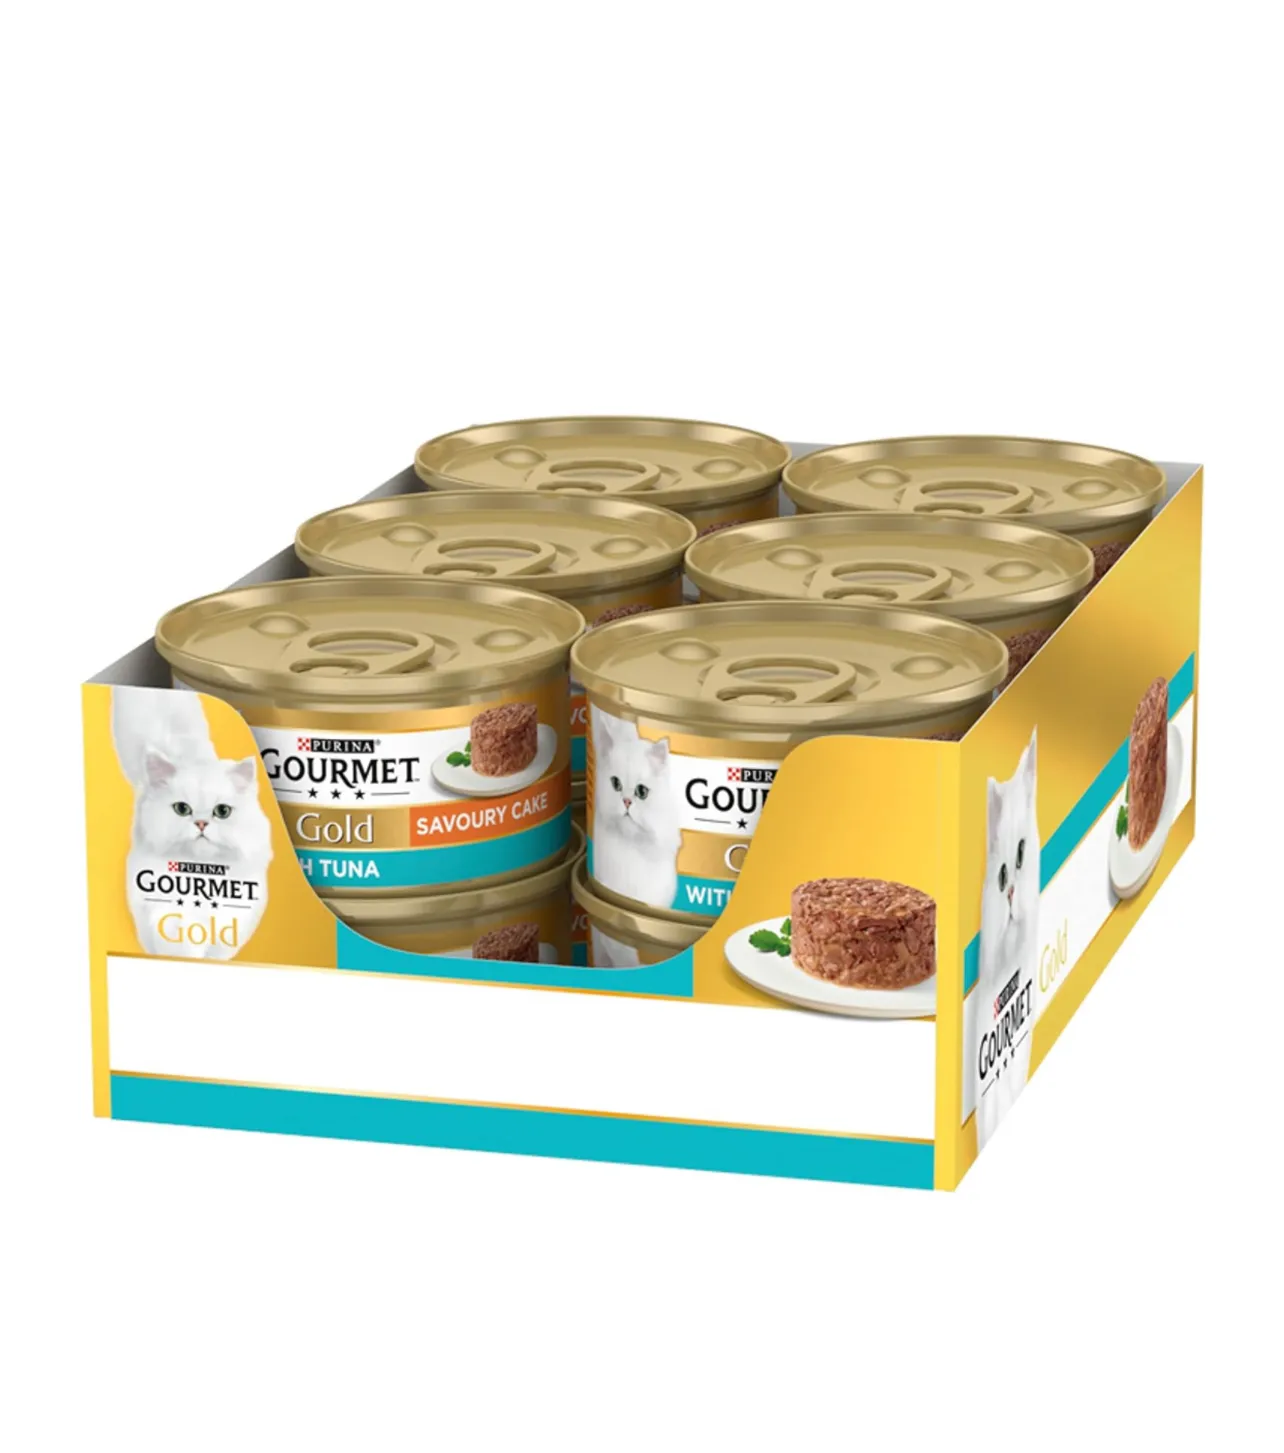 Purina Gourmet best Adult Cat Food Gold Savoury Cake Tuna Can, 85 g - Pack of 12 Counts, wholesale